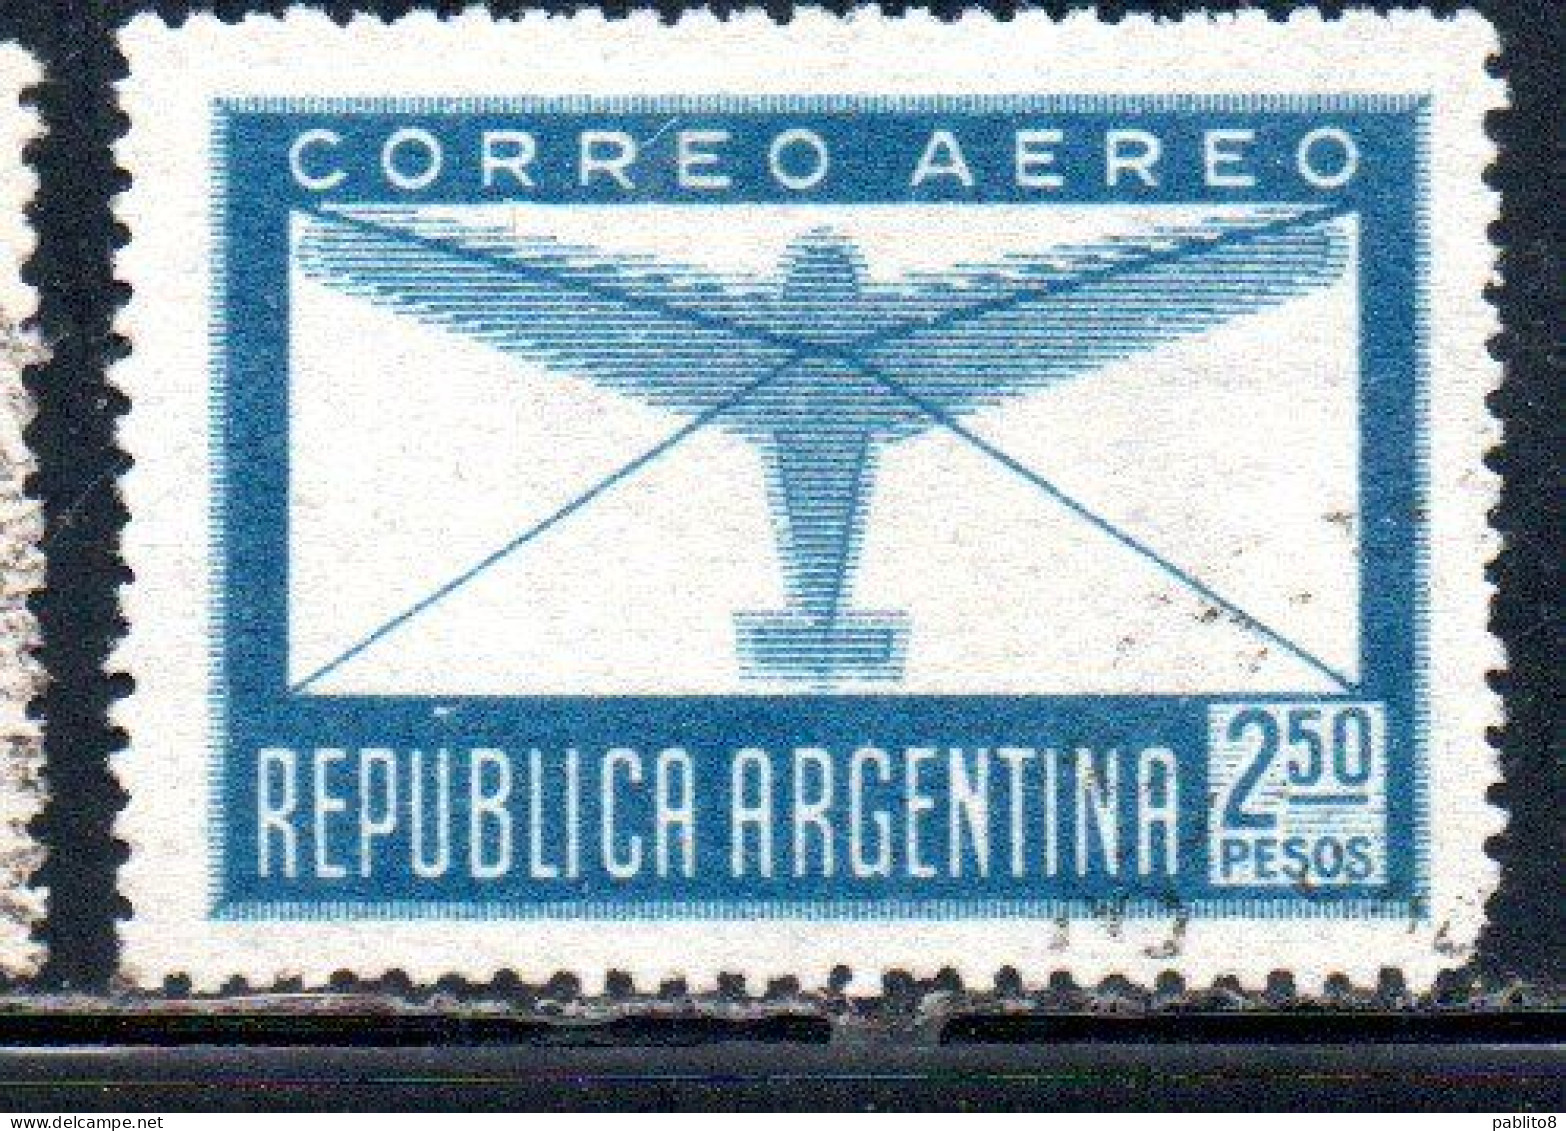 ARGENTINA 1942 1948  AIR POST MAIL CORREO AEREO AIRMAIL PLANE AND LETTER 2.50p USED USADO OBLITERE' - Luftpost